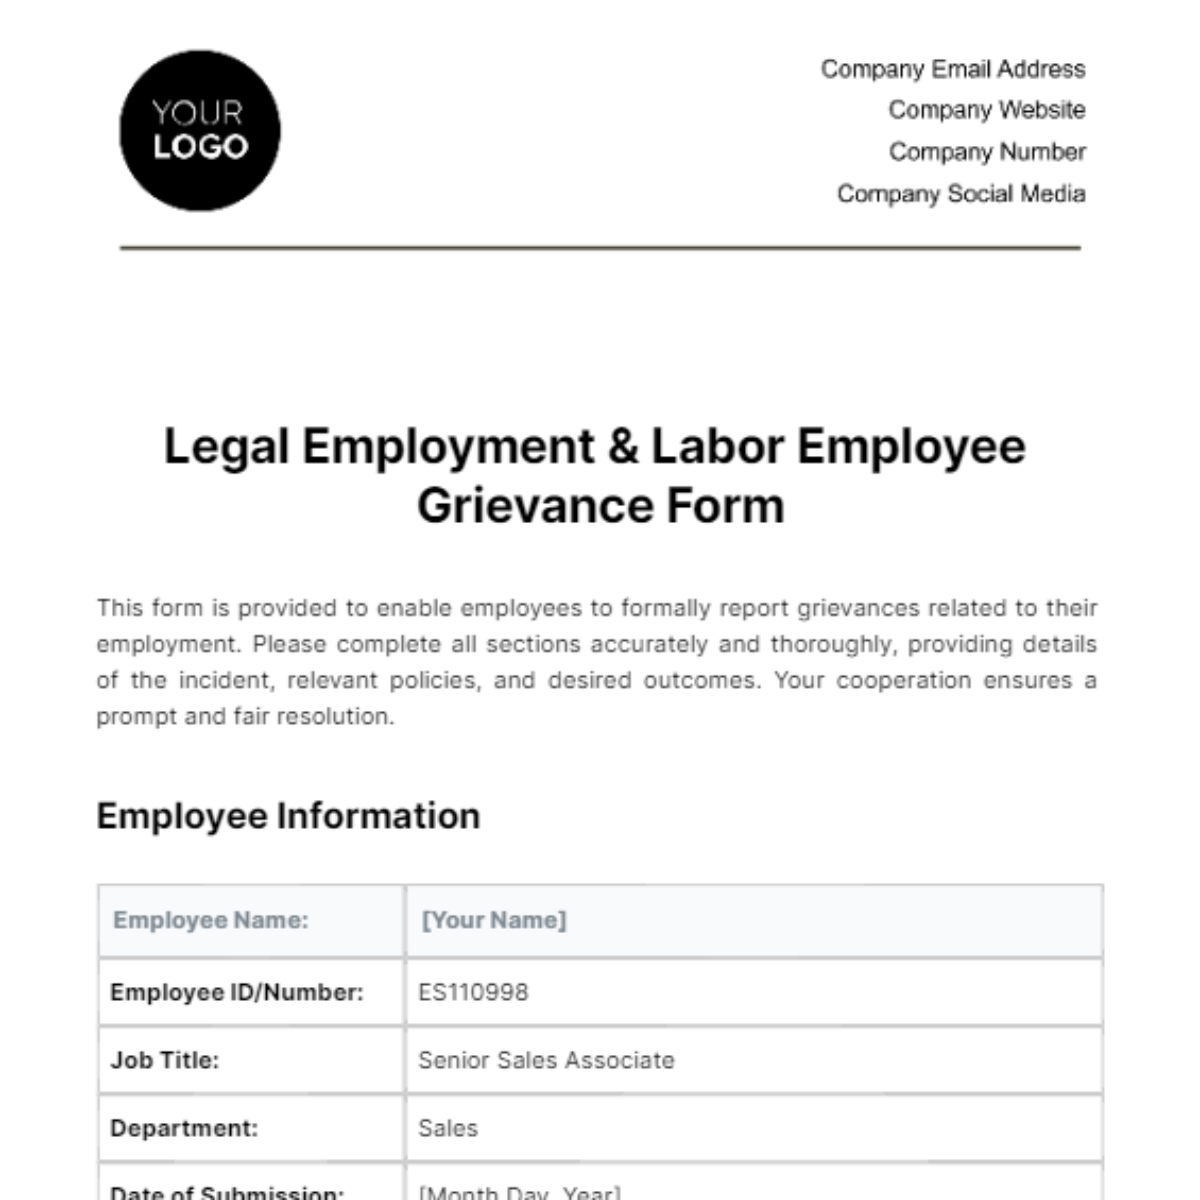 Legal Employment & Labor Employee Grievance Form Template